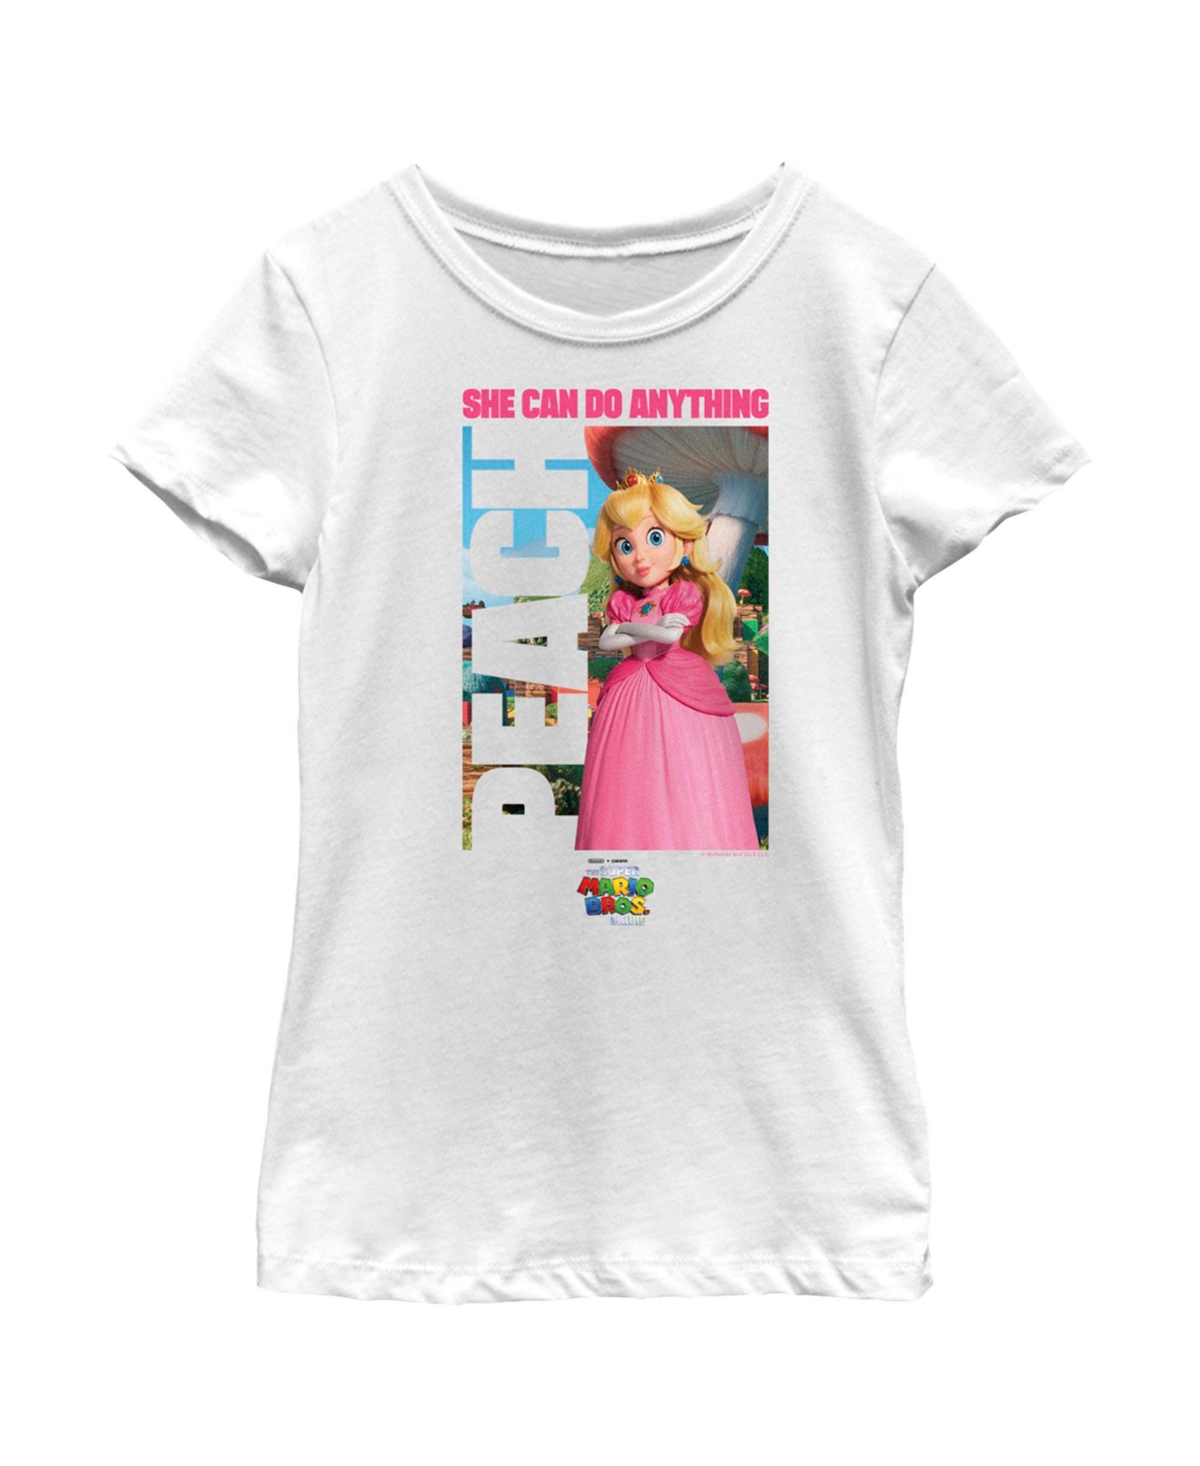 Nintendo Girl's The Super Mario Bros. Movie Peach She Can Do Anything Poster Child T-shirt In White